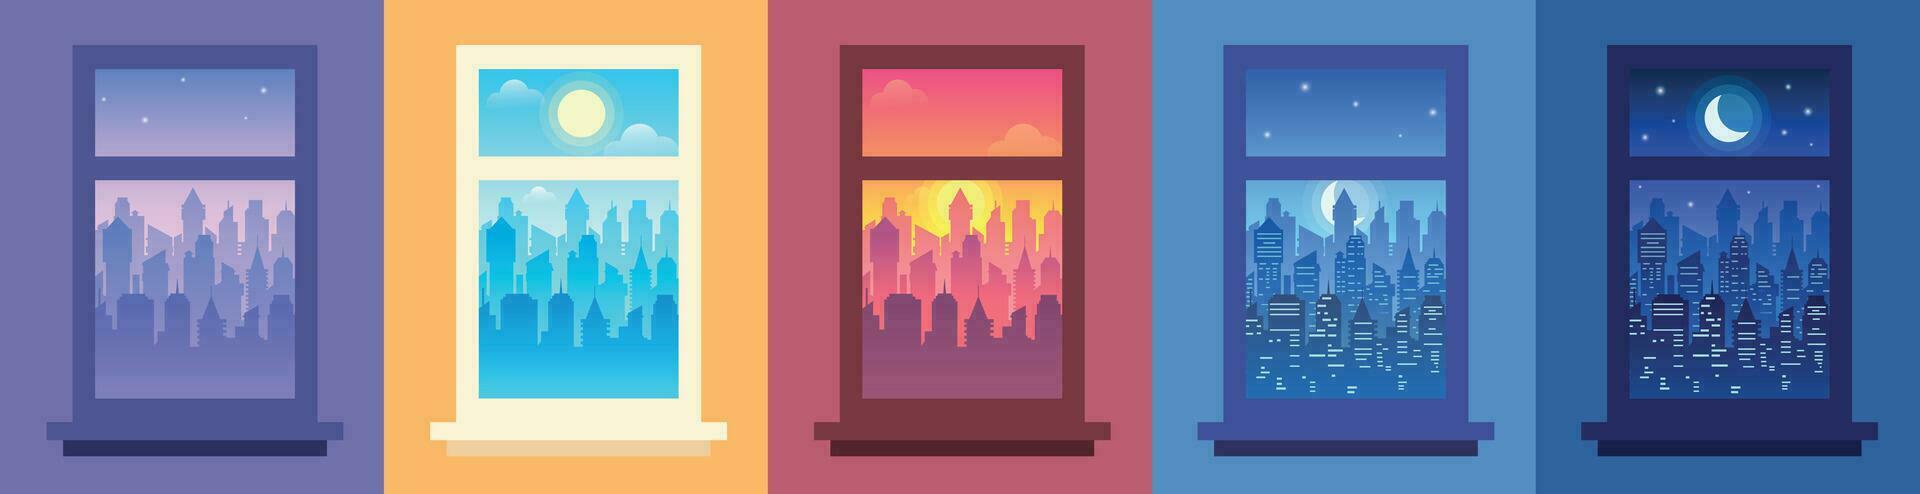 Daytime city landscape in window. Change of time of day, night city view from window and cityscape in frame vector illustration set